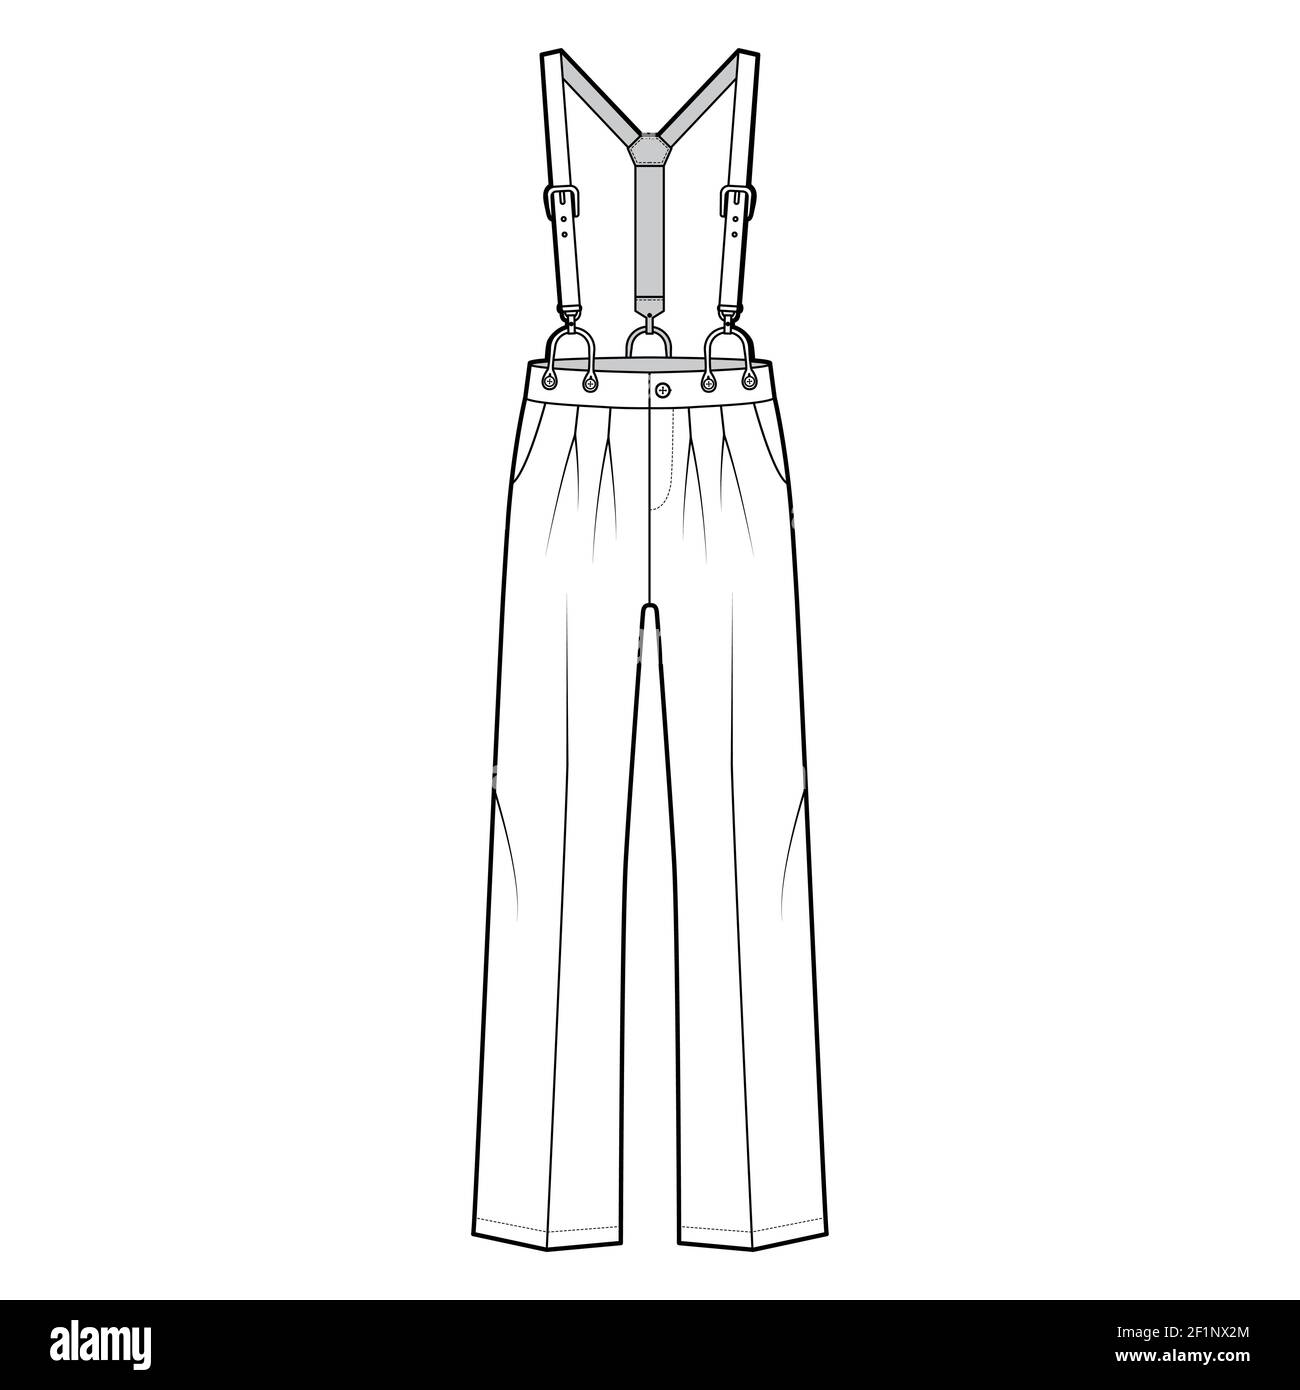 Suspender Pants Dungarees technical fashion illustration with full length, low waist, rise, pockets. Flat apparel garment bottom front, white color style. Women, men unisex CAD mockup Stock Vector